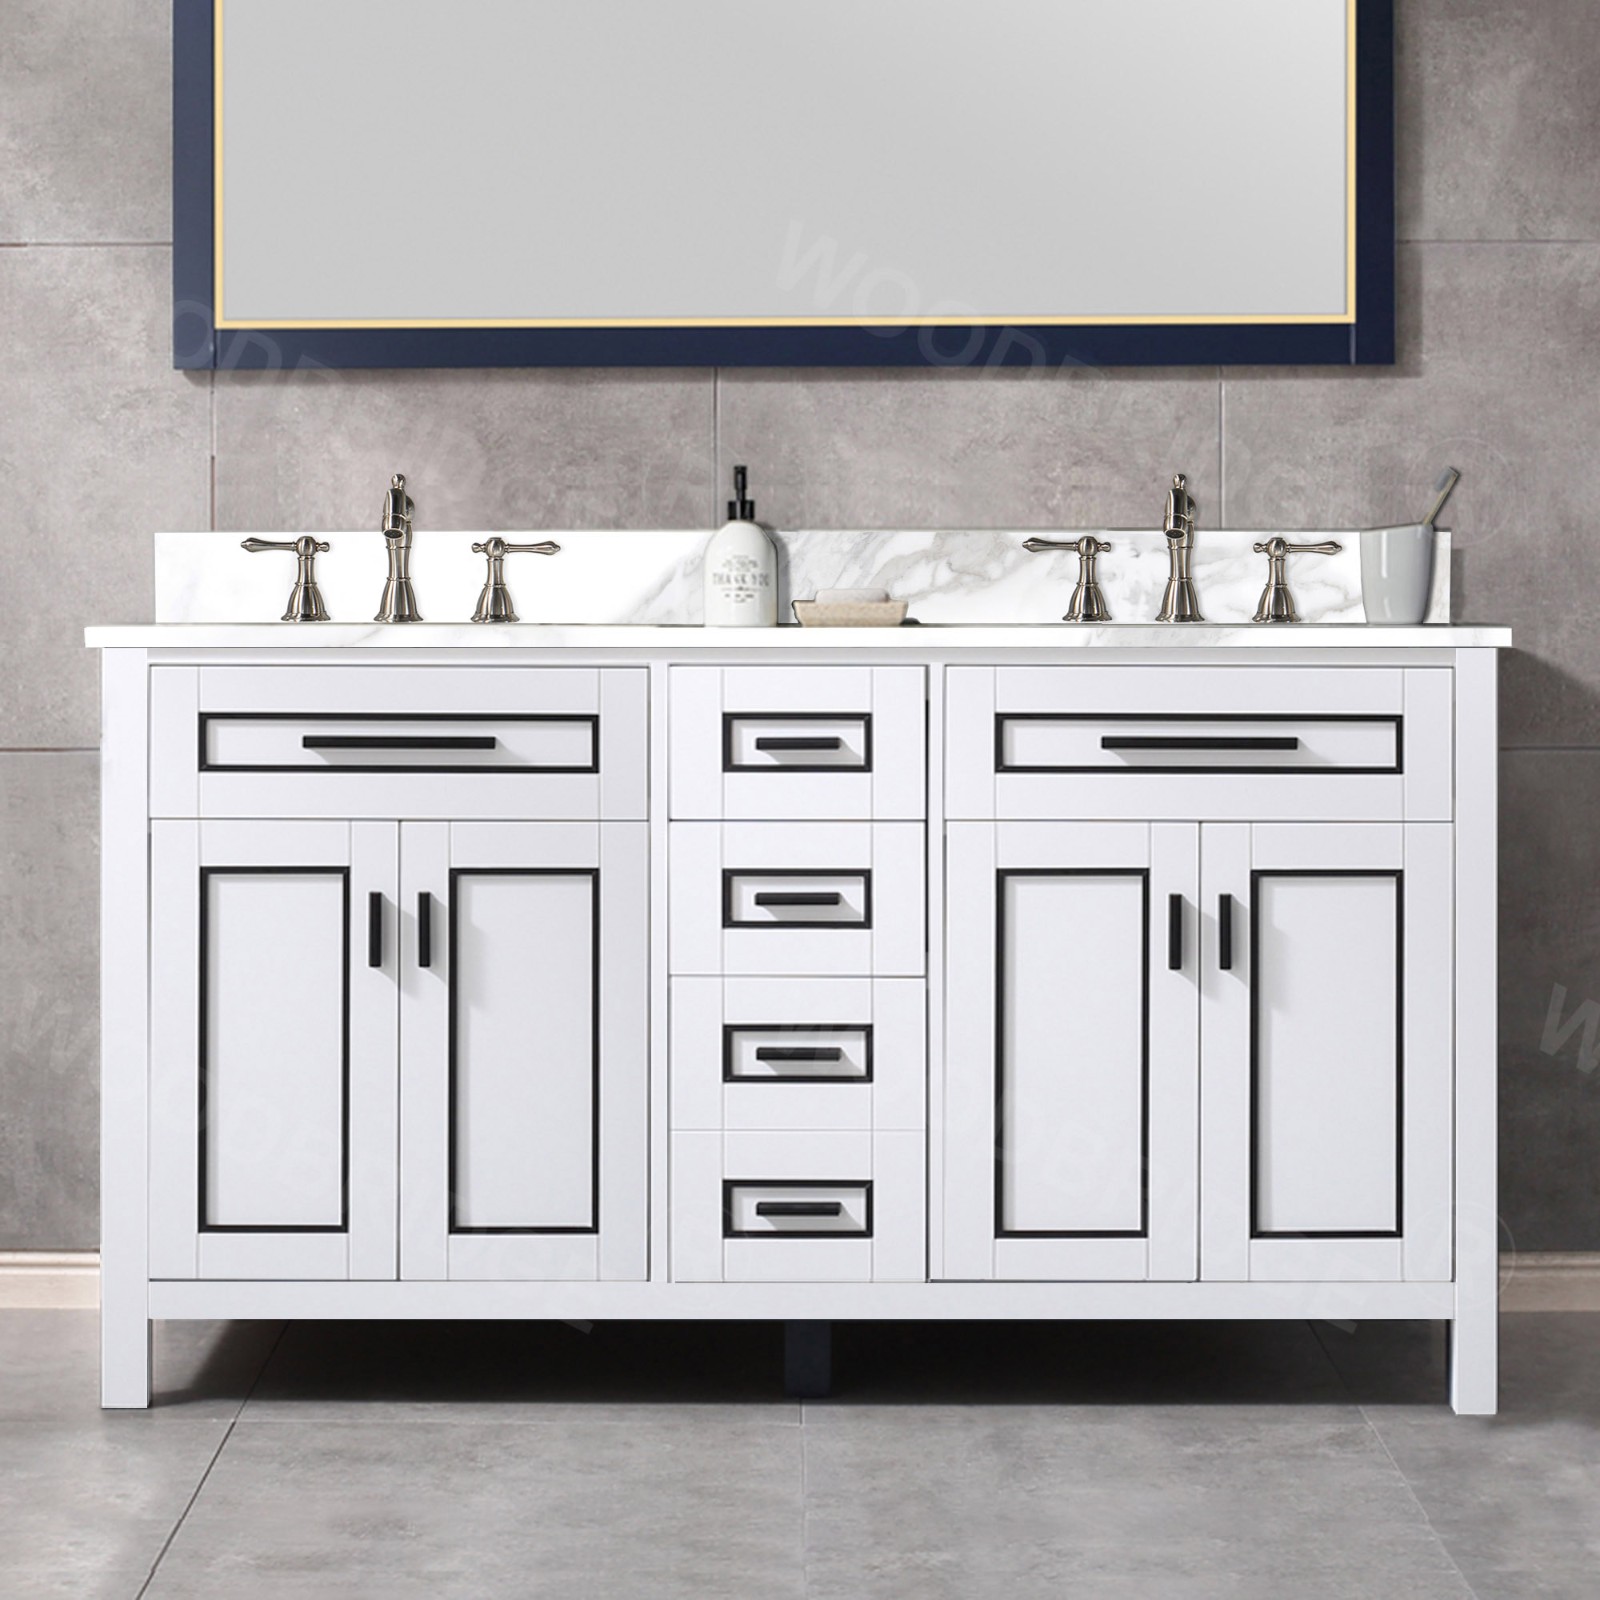  WOODBRIDGE Milan  61” Floor Mounted Single Basin Vanity Set with Solid Wood Cabinet in White and Engineered stone composite Vanity Top in Fish Belly White with Pre-installed Undermount Rectangle Bathroom Sink and Pre-Drilled 3-Hole for 4”Centerset Faucet_4598